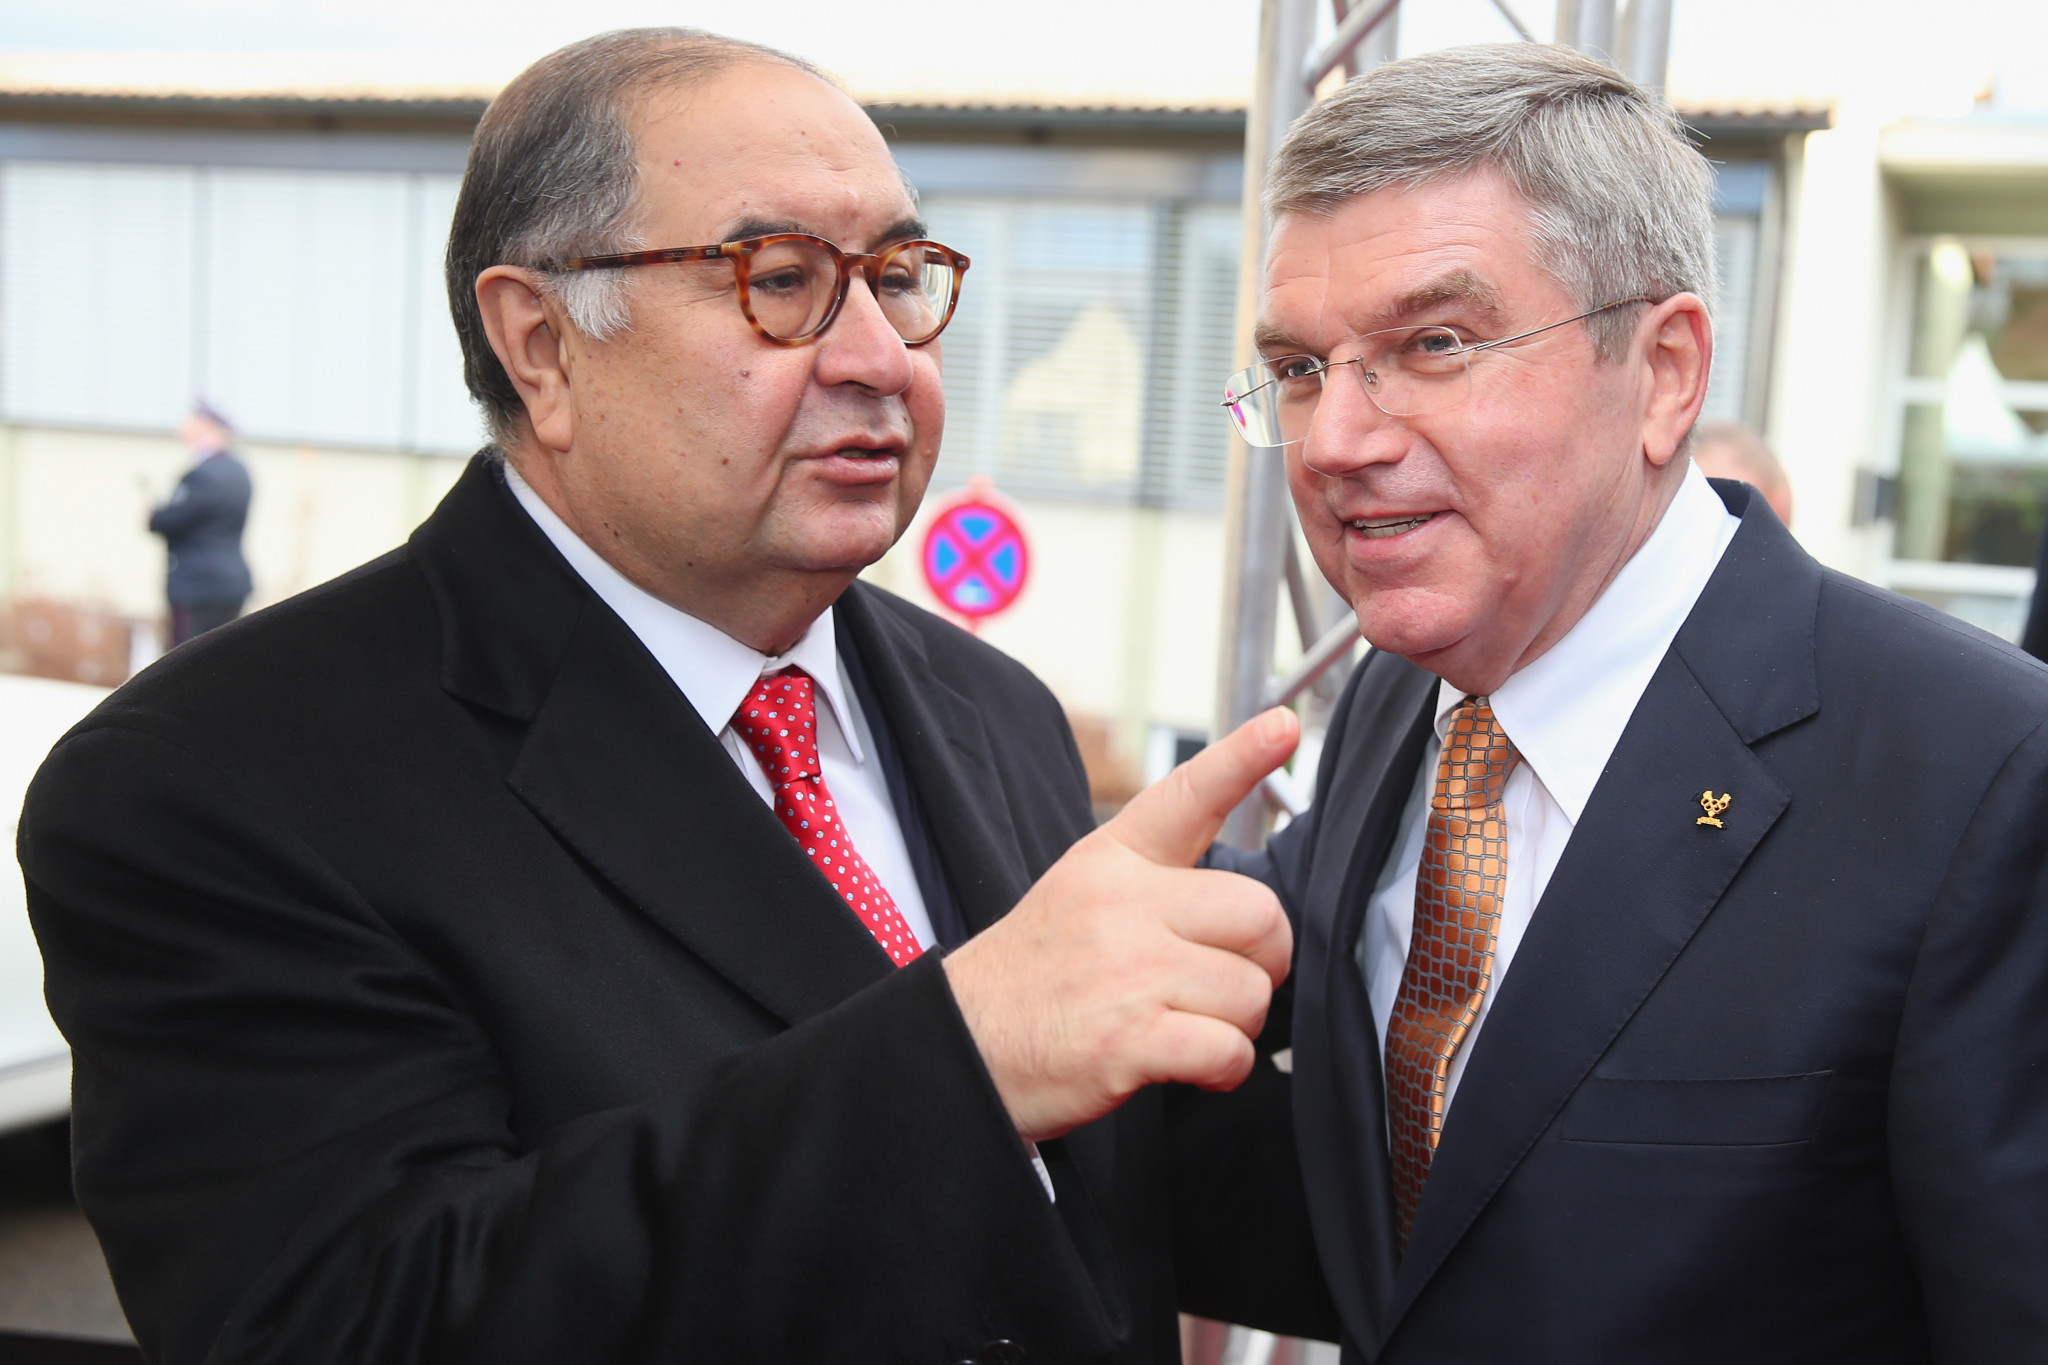 Alisher Usmanov, left, President of the International Fencing Federation, seen chatting to IOC President Thomas Bach at the latter's 60th Birthday party in Tauberbischofsheim, Germany back in January 2014 ©Getty Images